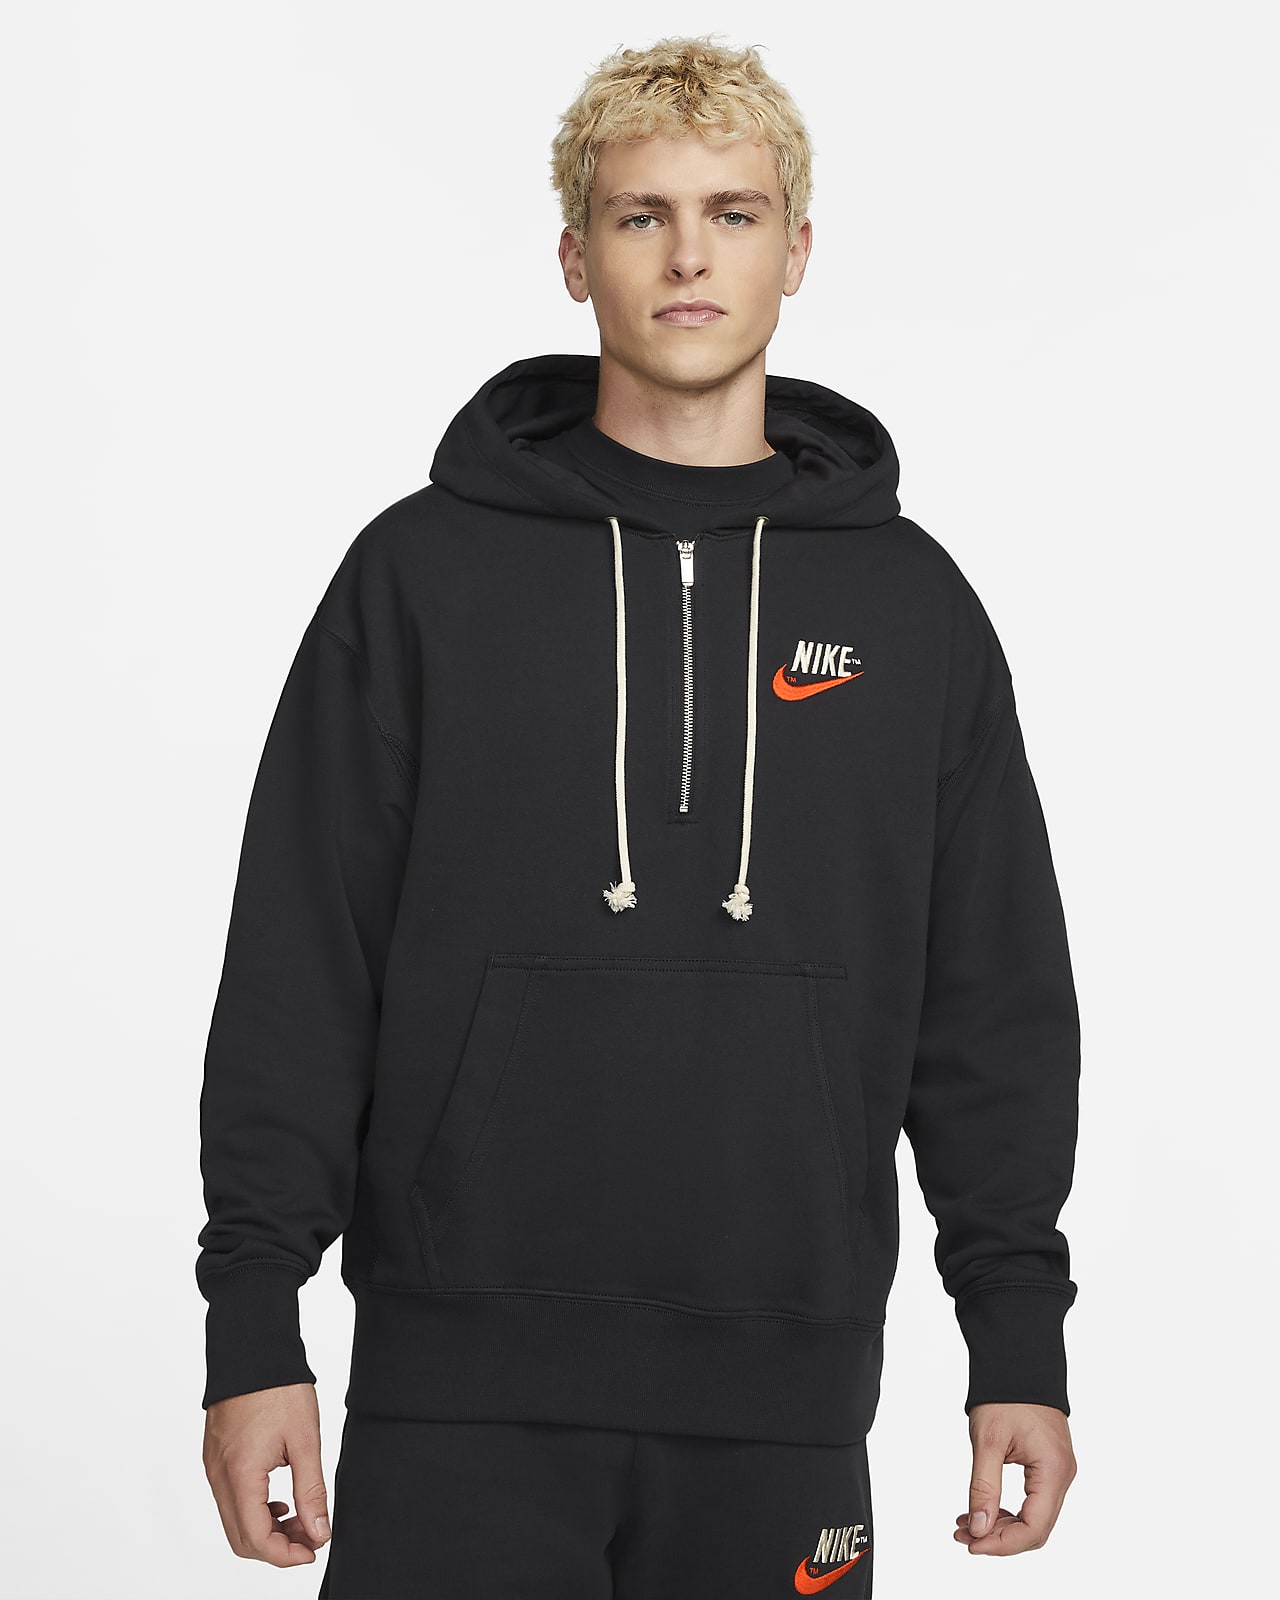 Nike Sportswear Men's French Terry Pullover Hoodie